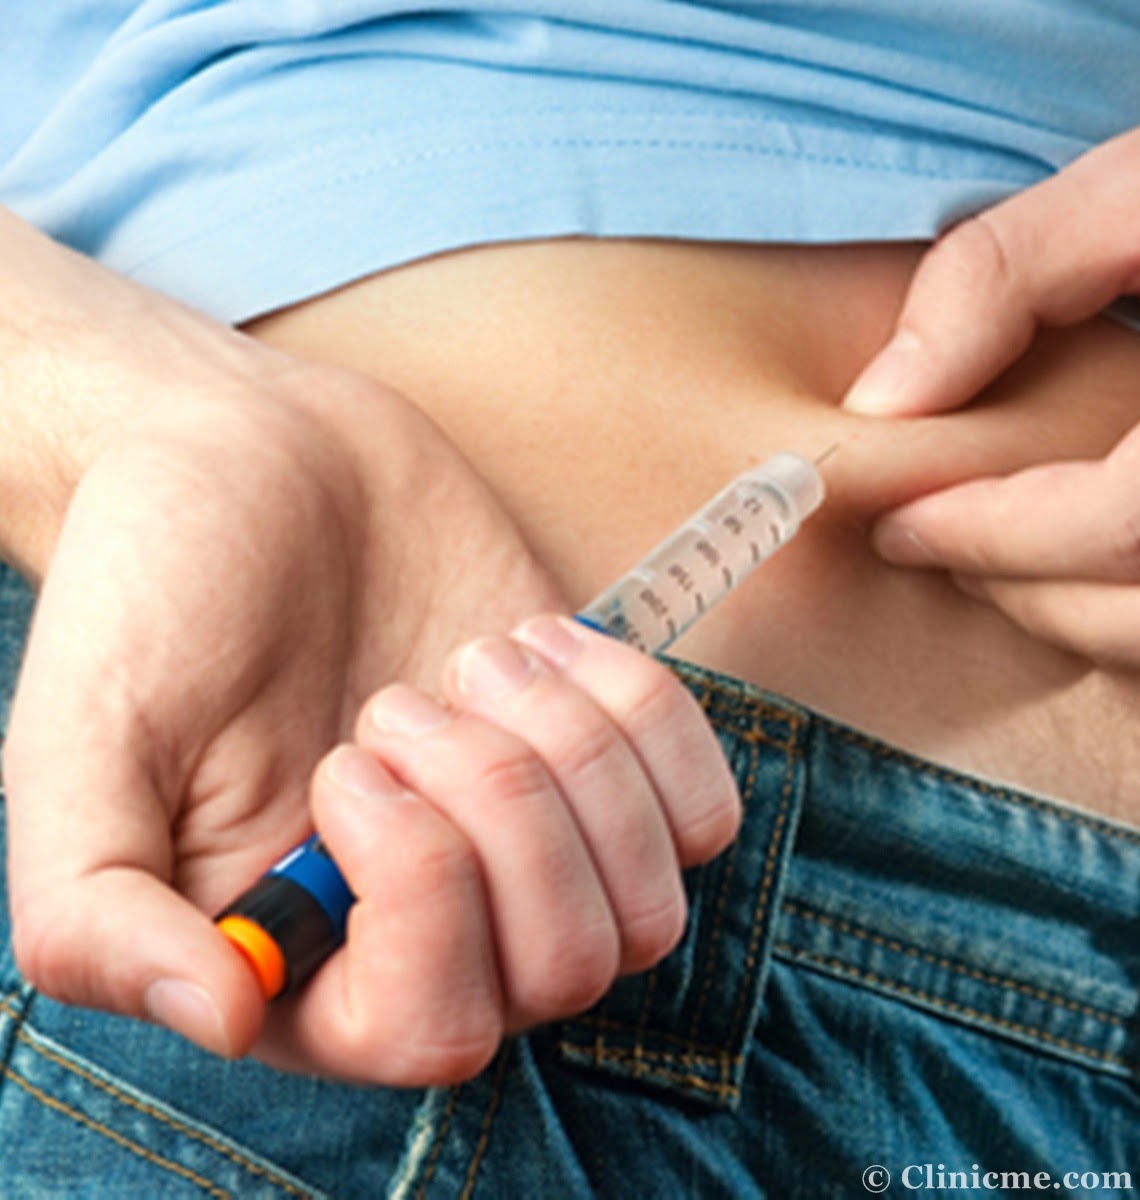 Insulin Injection Tips